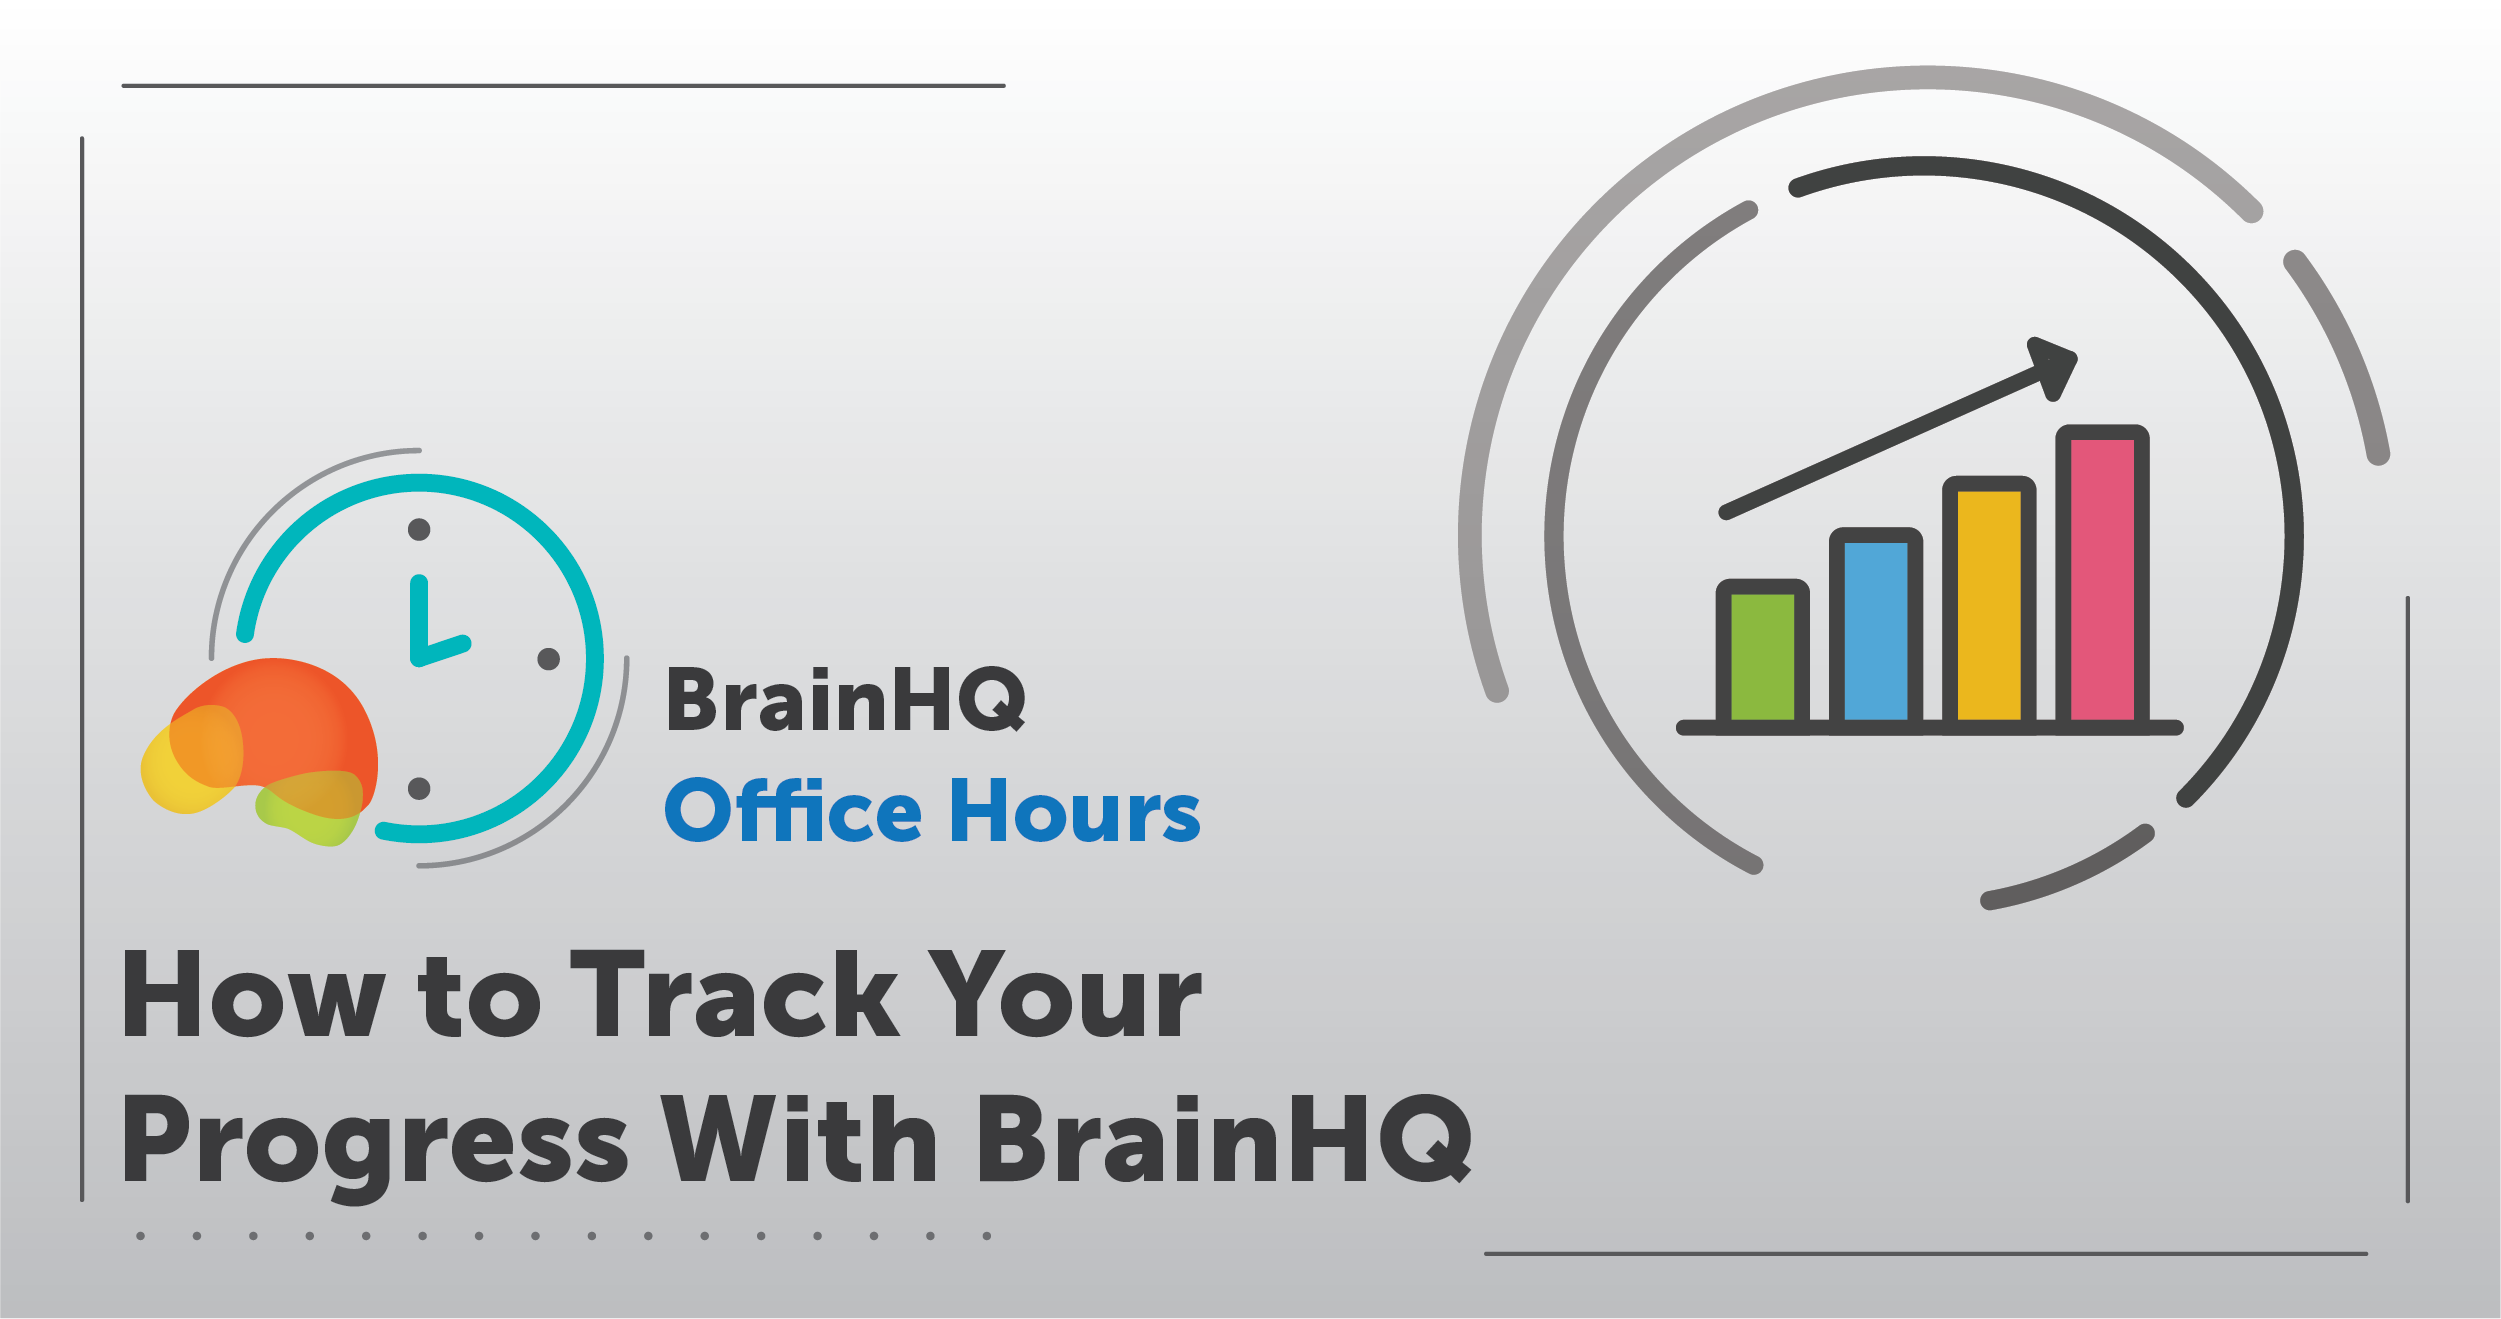 How to Track Your Progress With BrainHQ